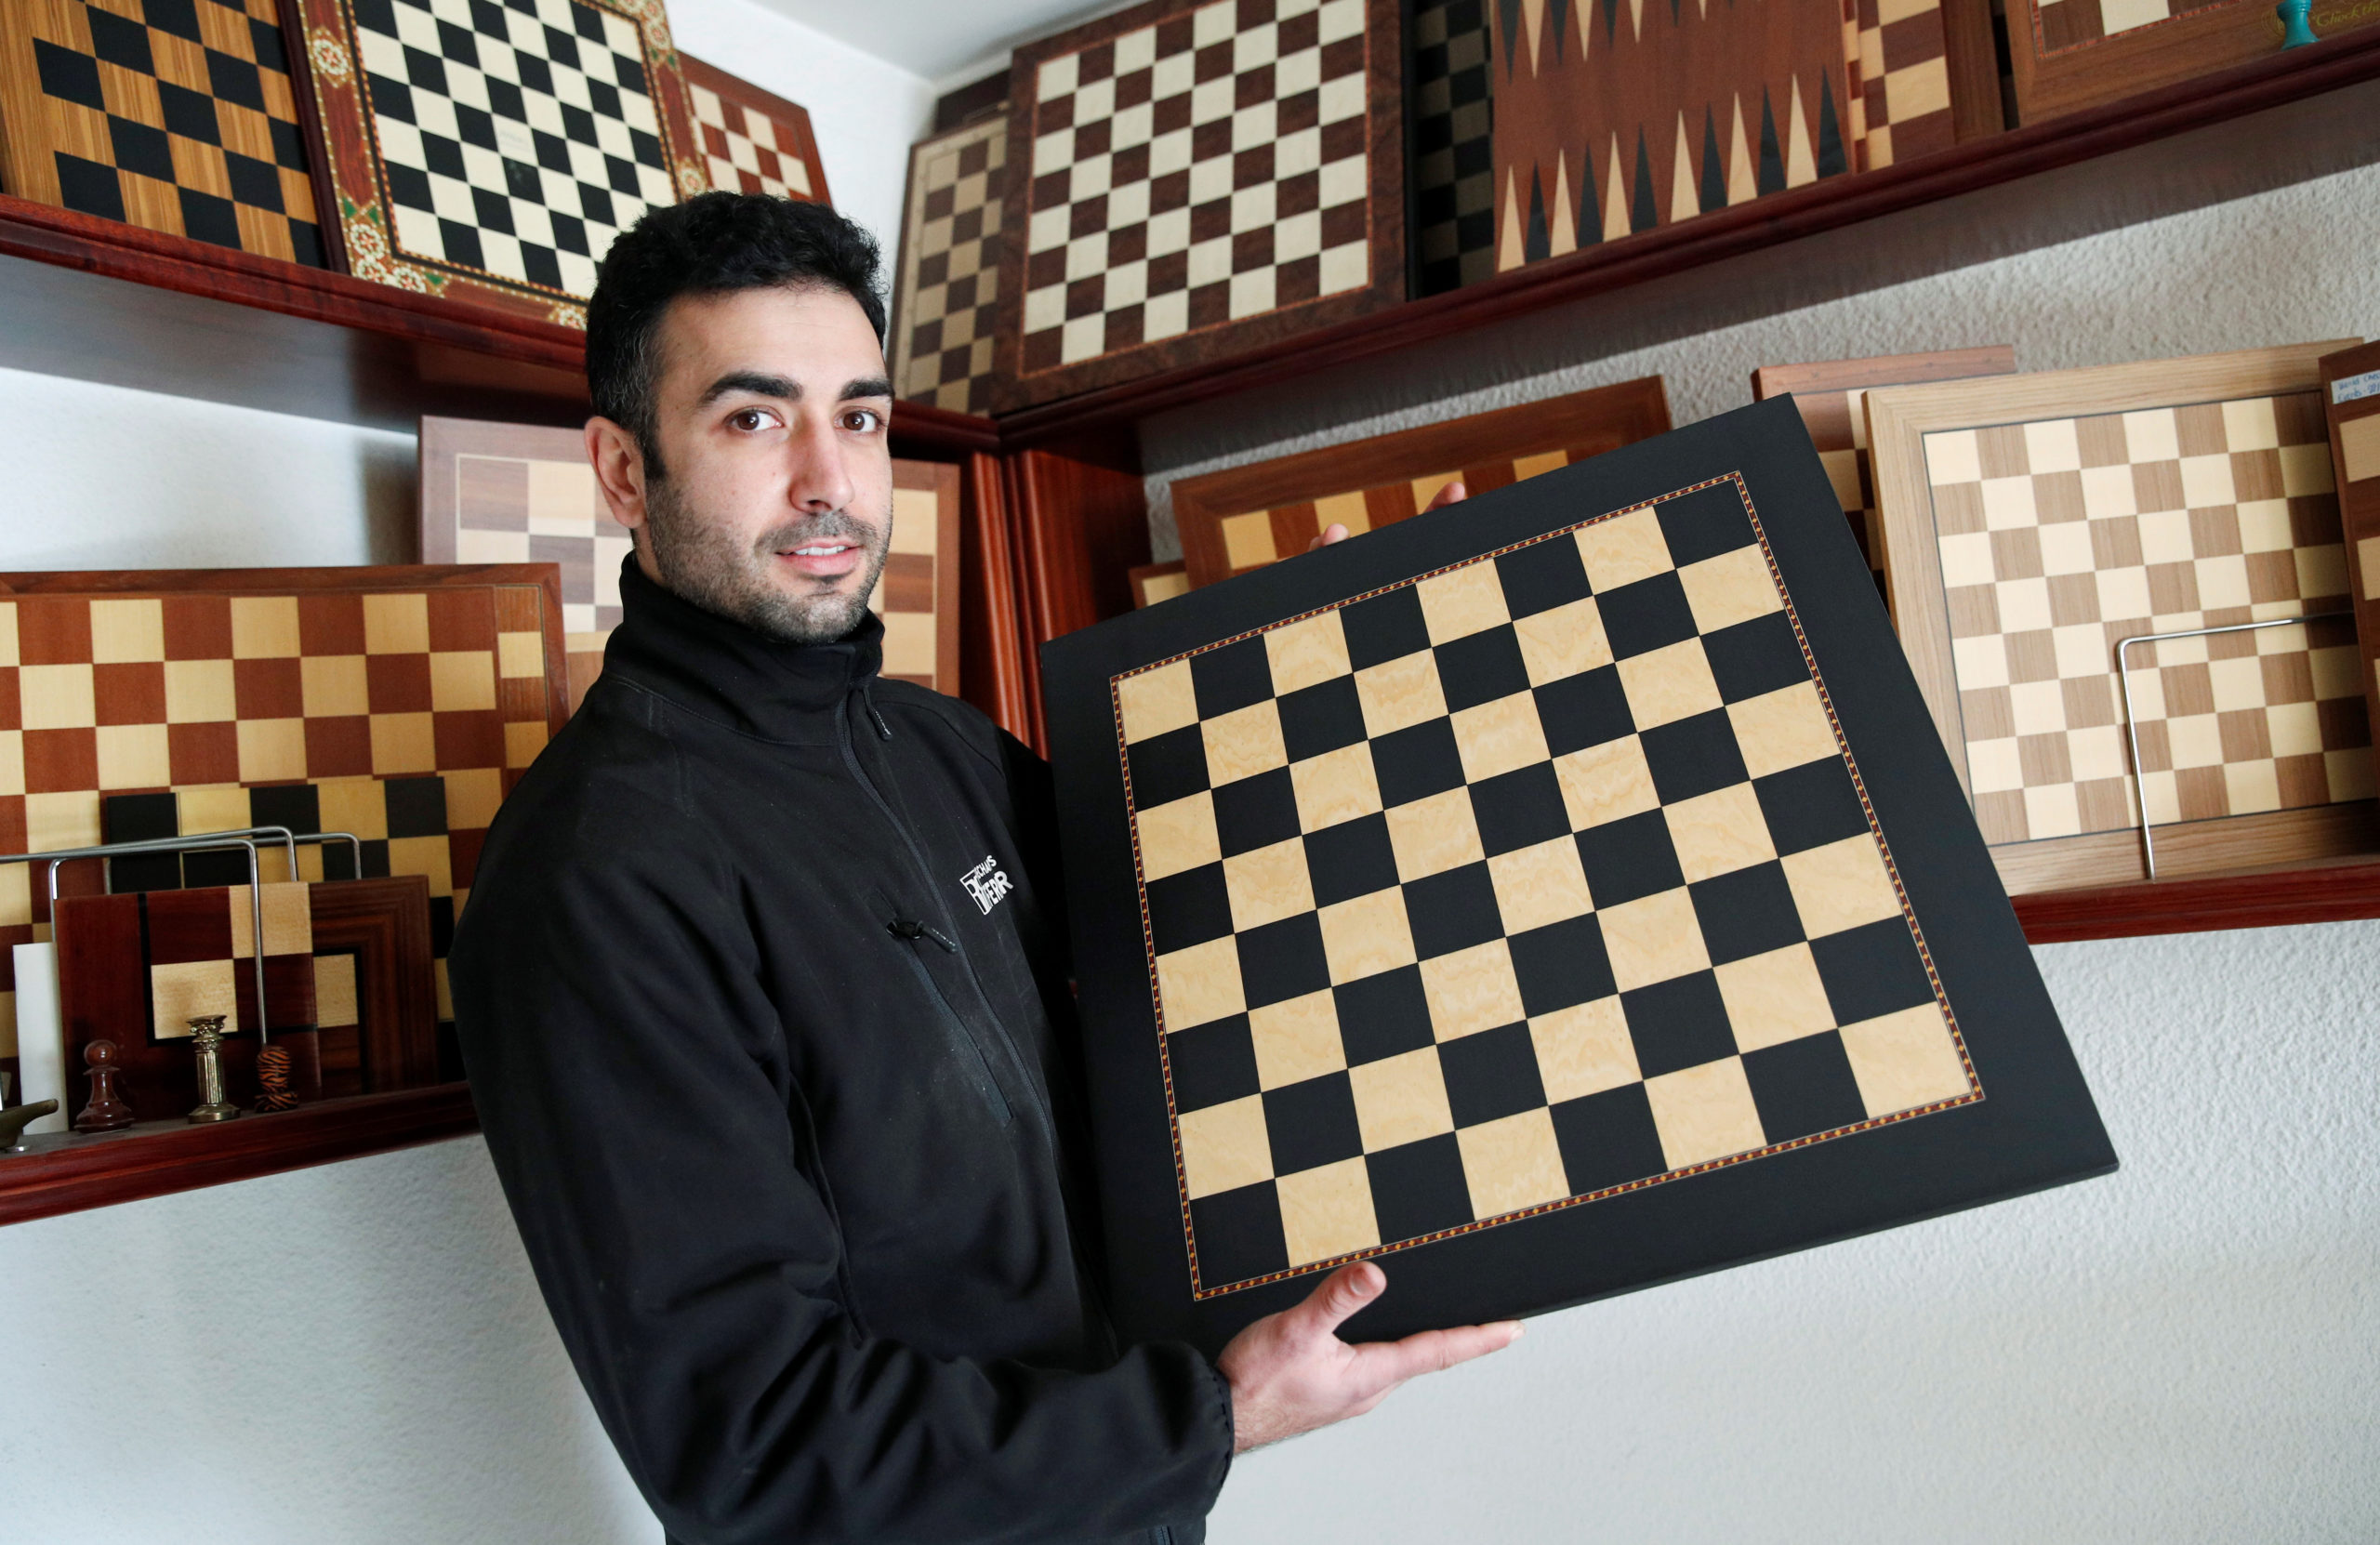 Spanish chess board sales soar after 'Queen's Gambit' cameo